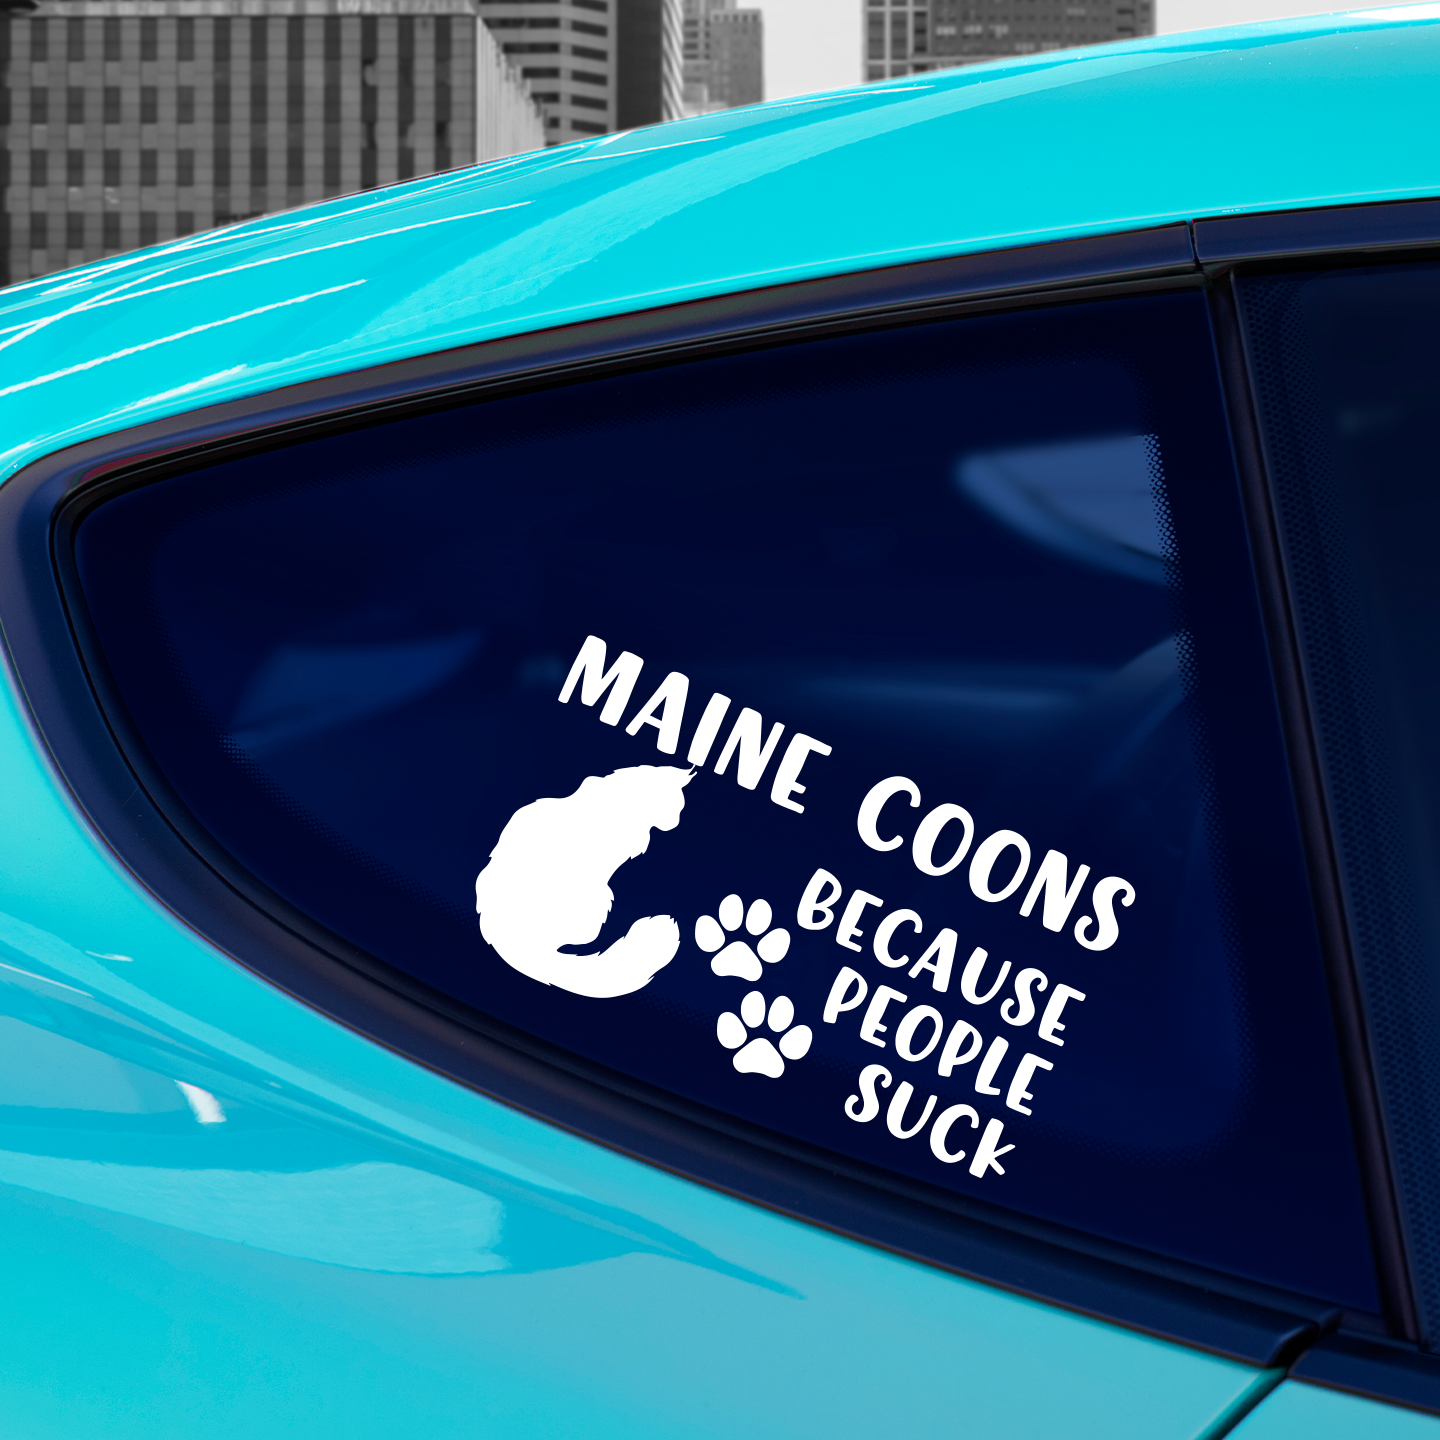 Maine Coons Because People Suck Sticker